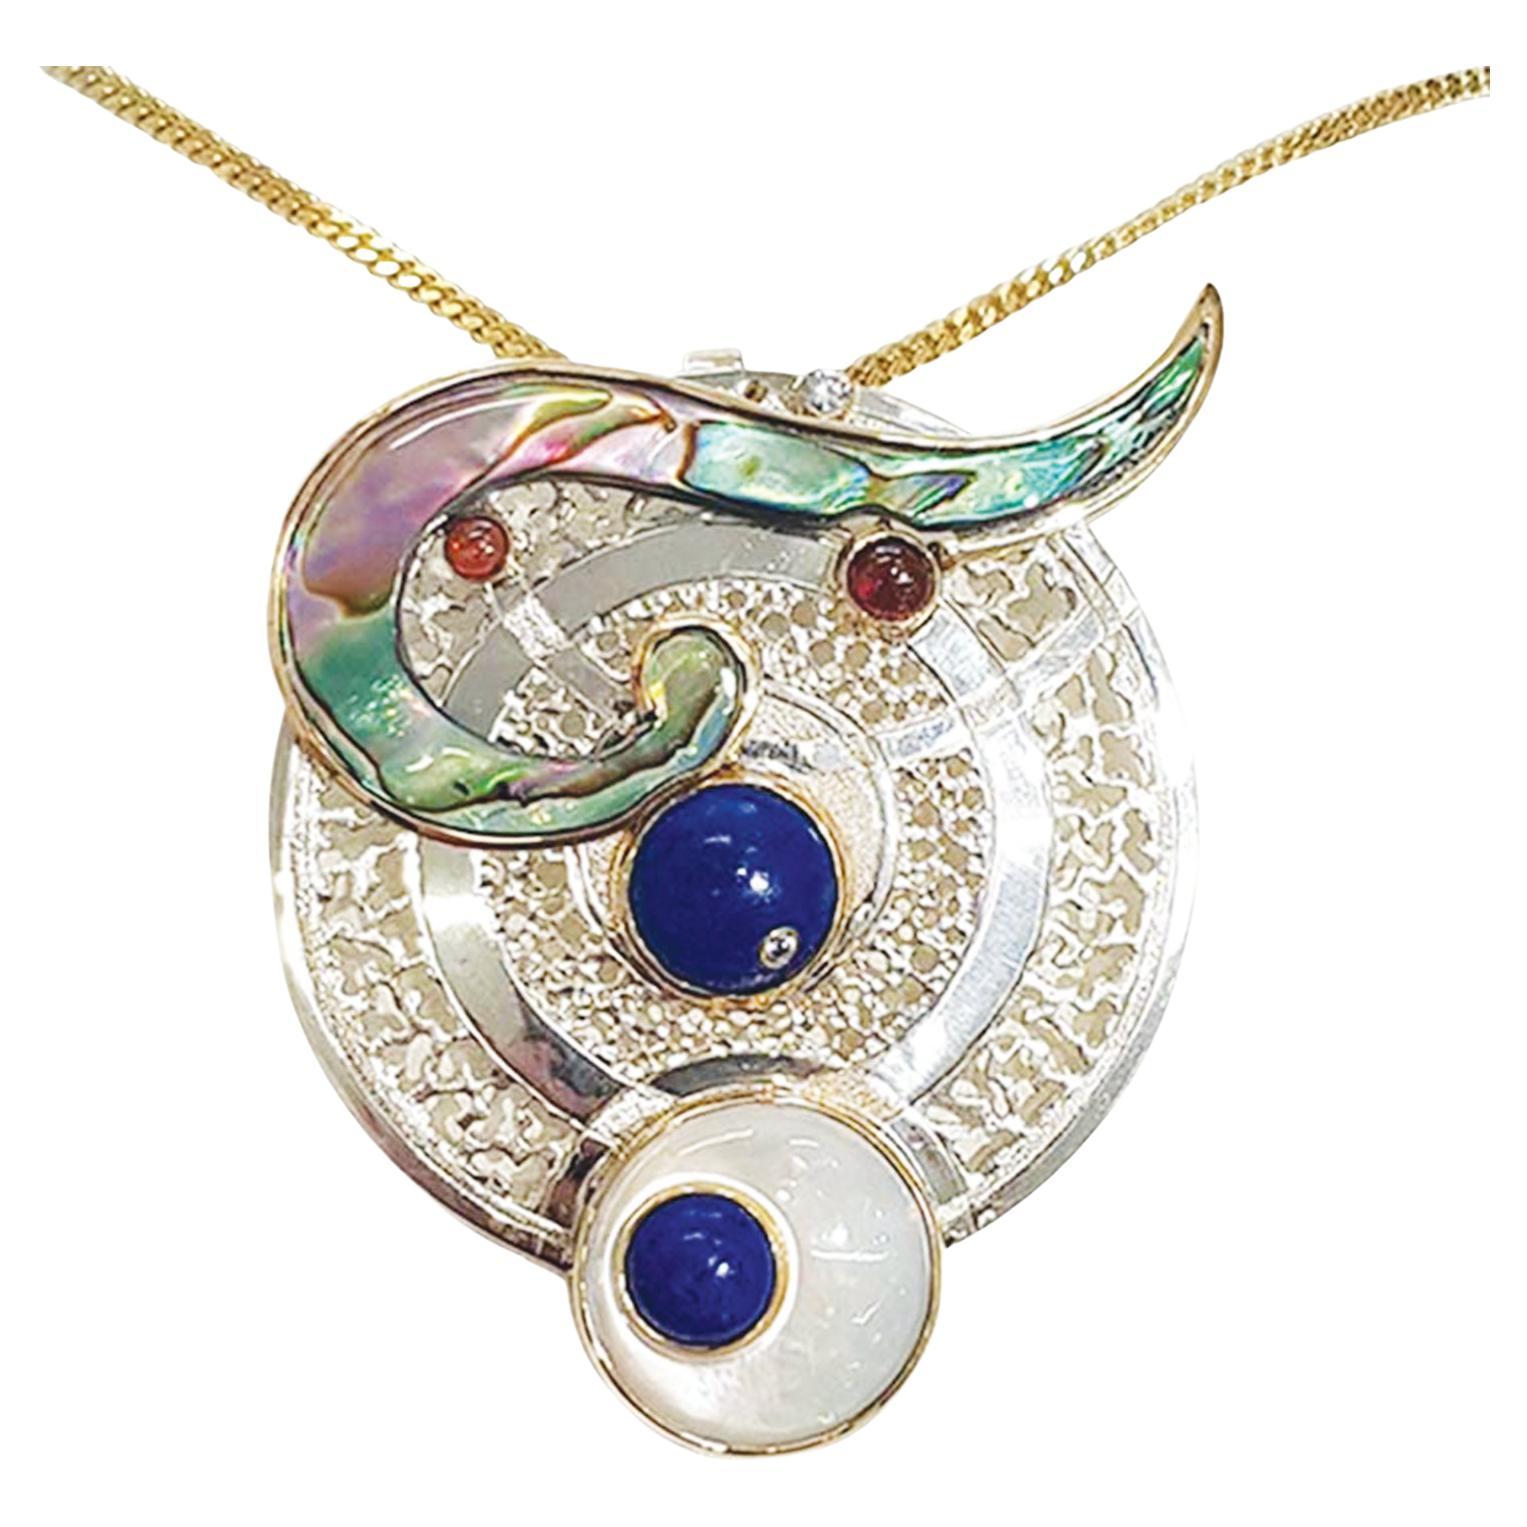 Paul Amey "Constellation" Pendant in Sterling Silver and 9K Gold and Lapis